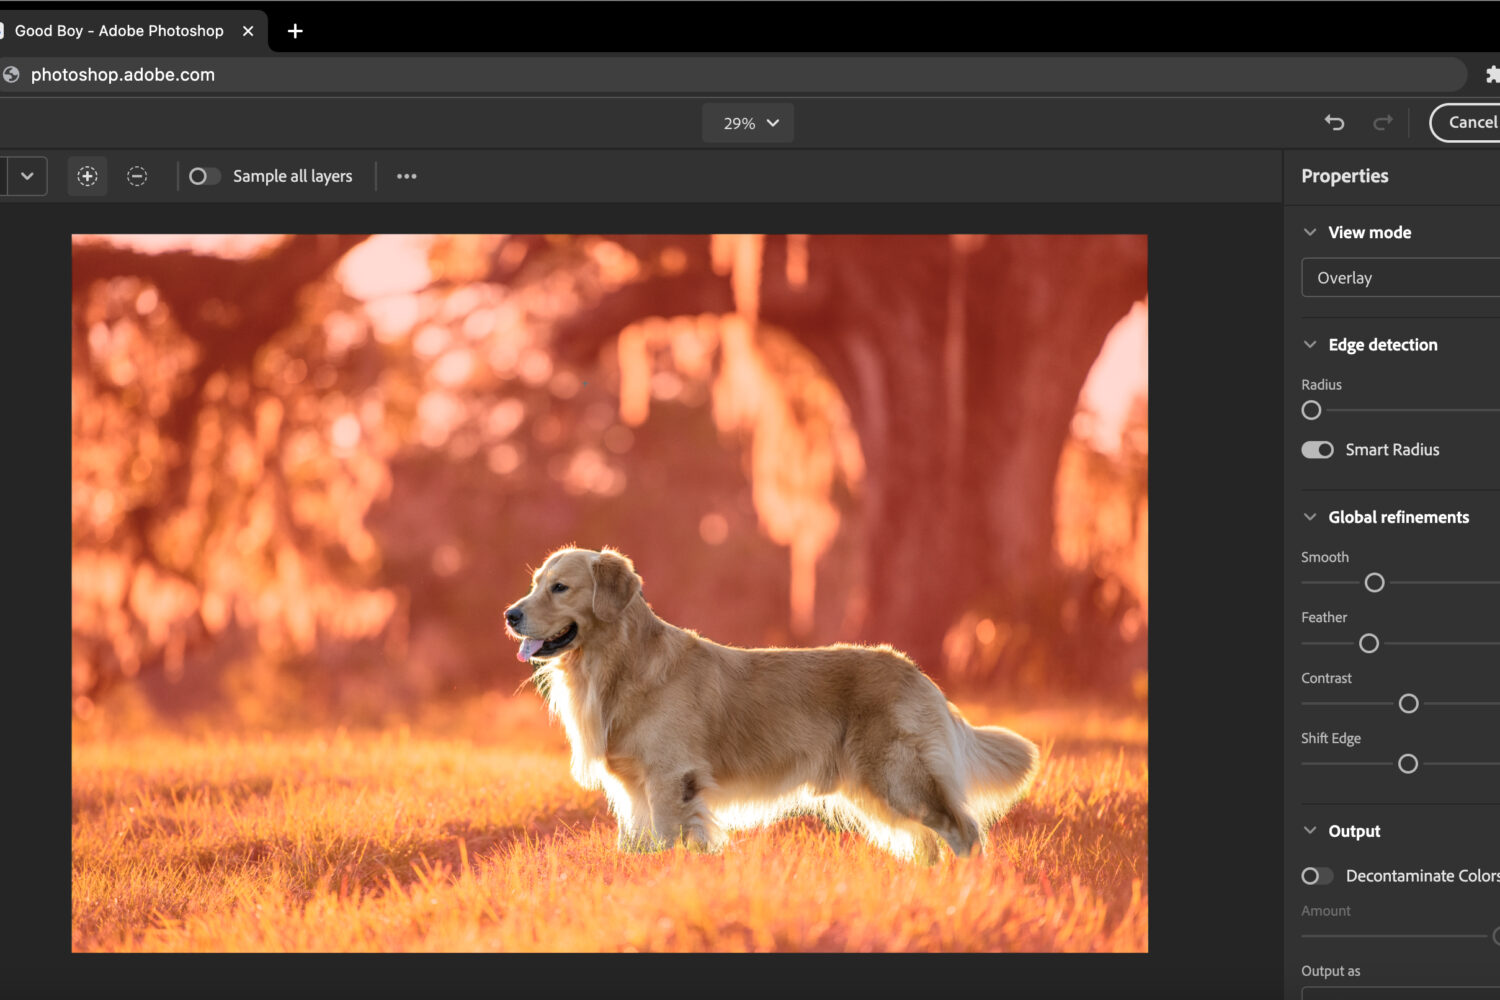 The Refine Edge feature is showcased in this browser screenshot of the web version of Photoshop, provided by Adobe